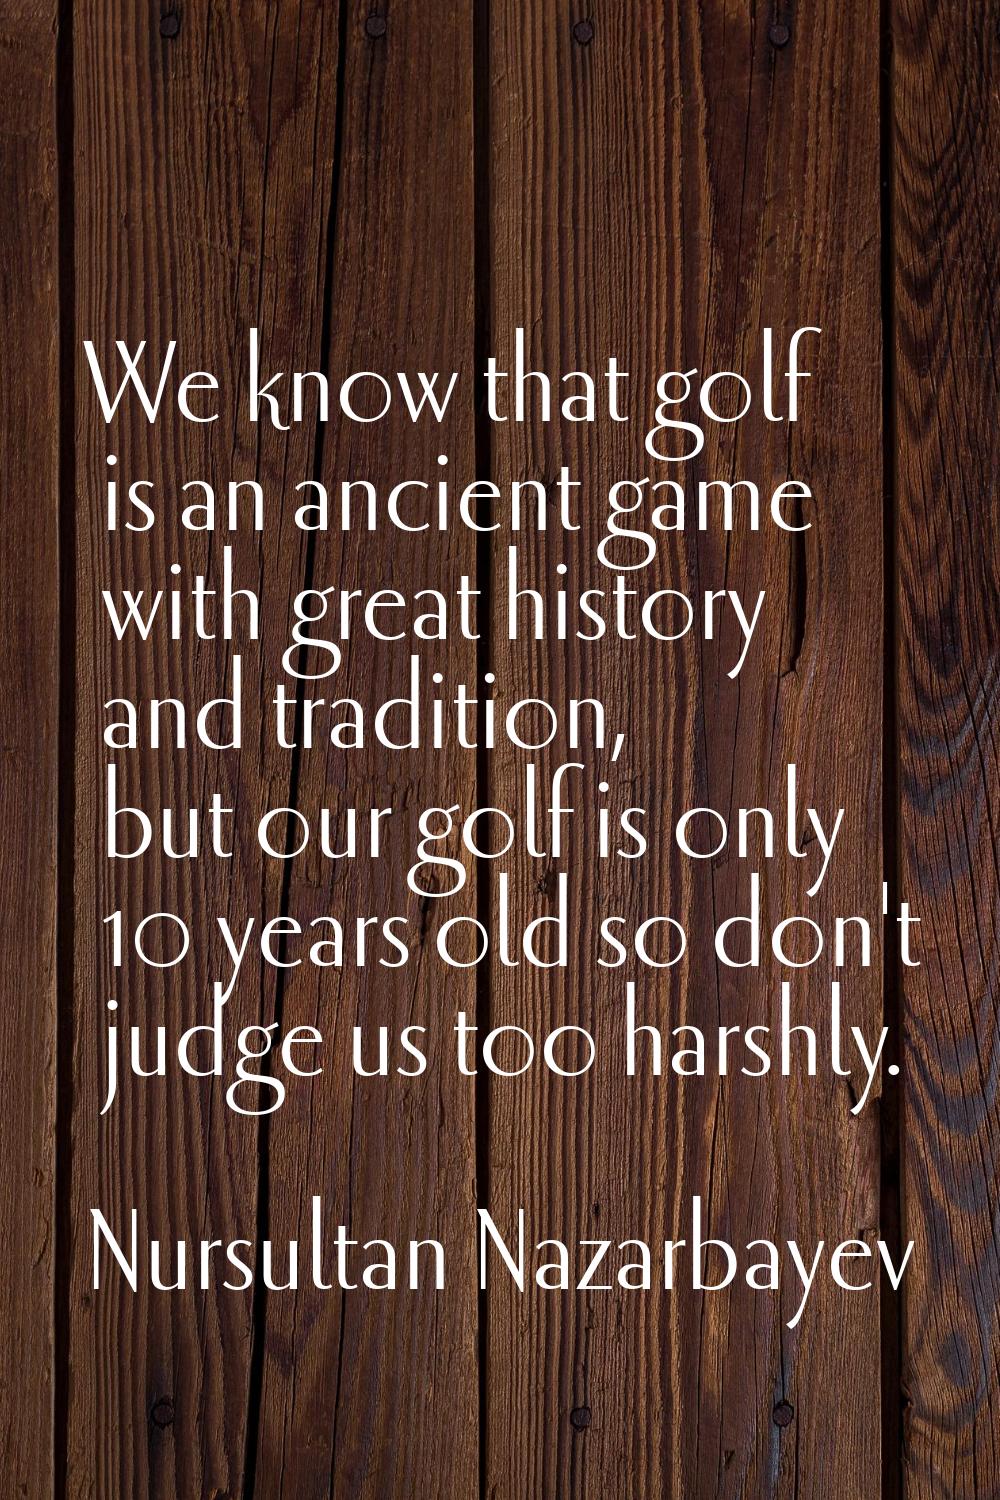 We know that golf is an ancient game with great history and tradition, but our golf is only 10 year